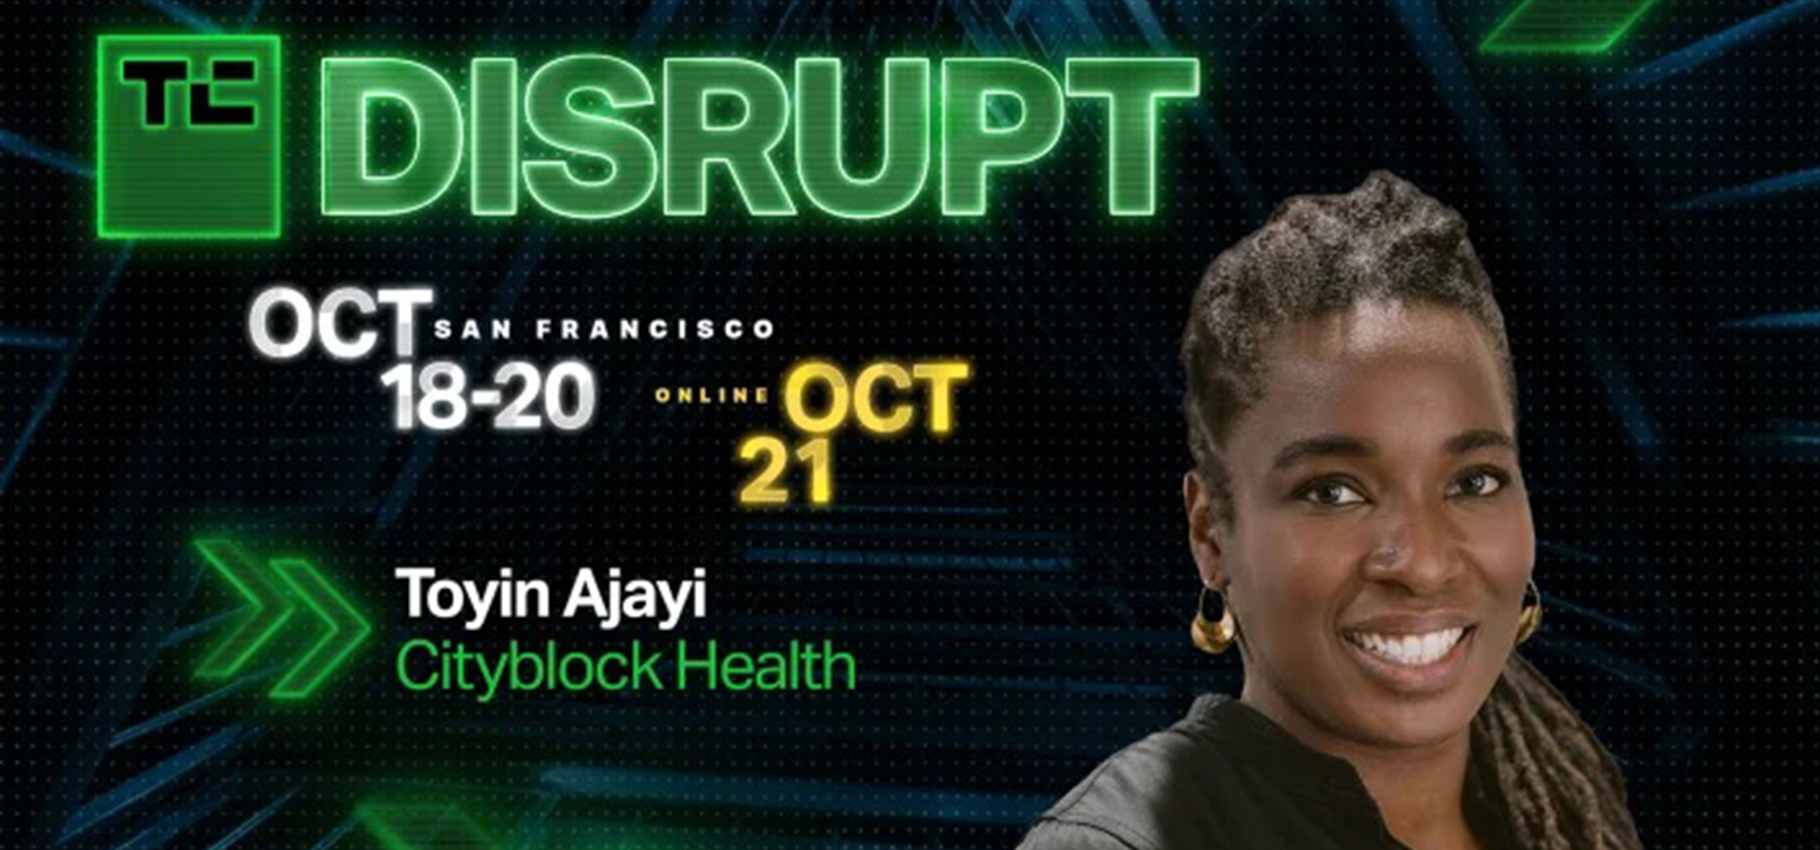 Cityblock Health CEO Toyin Ajayi will discuss human-centered healthcare at Disrupt